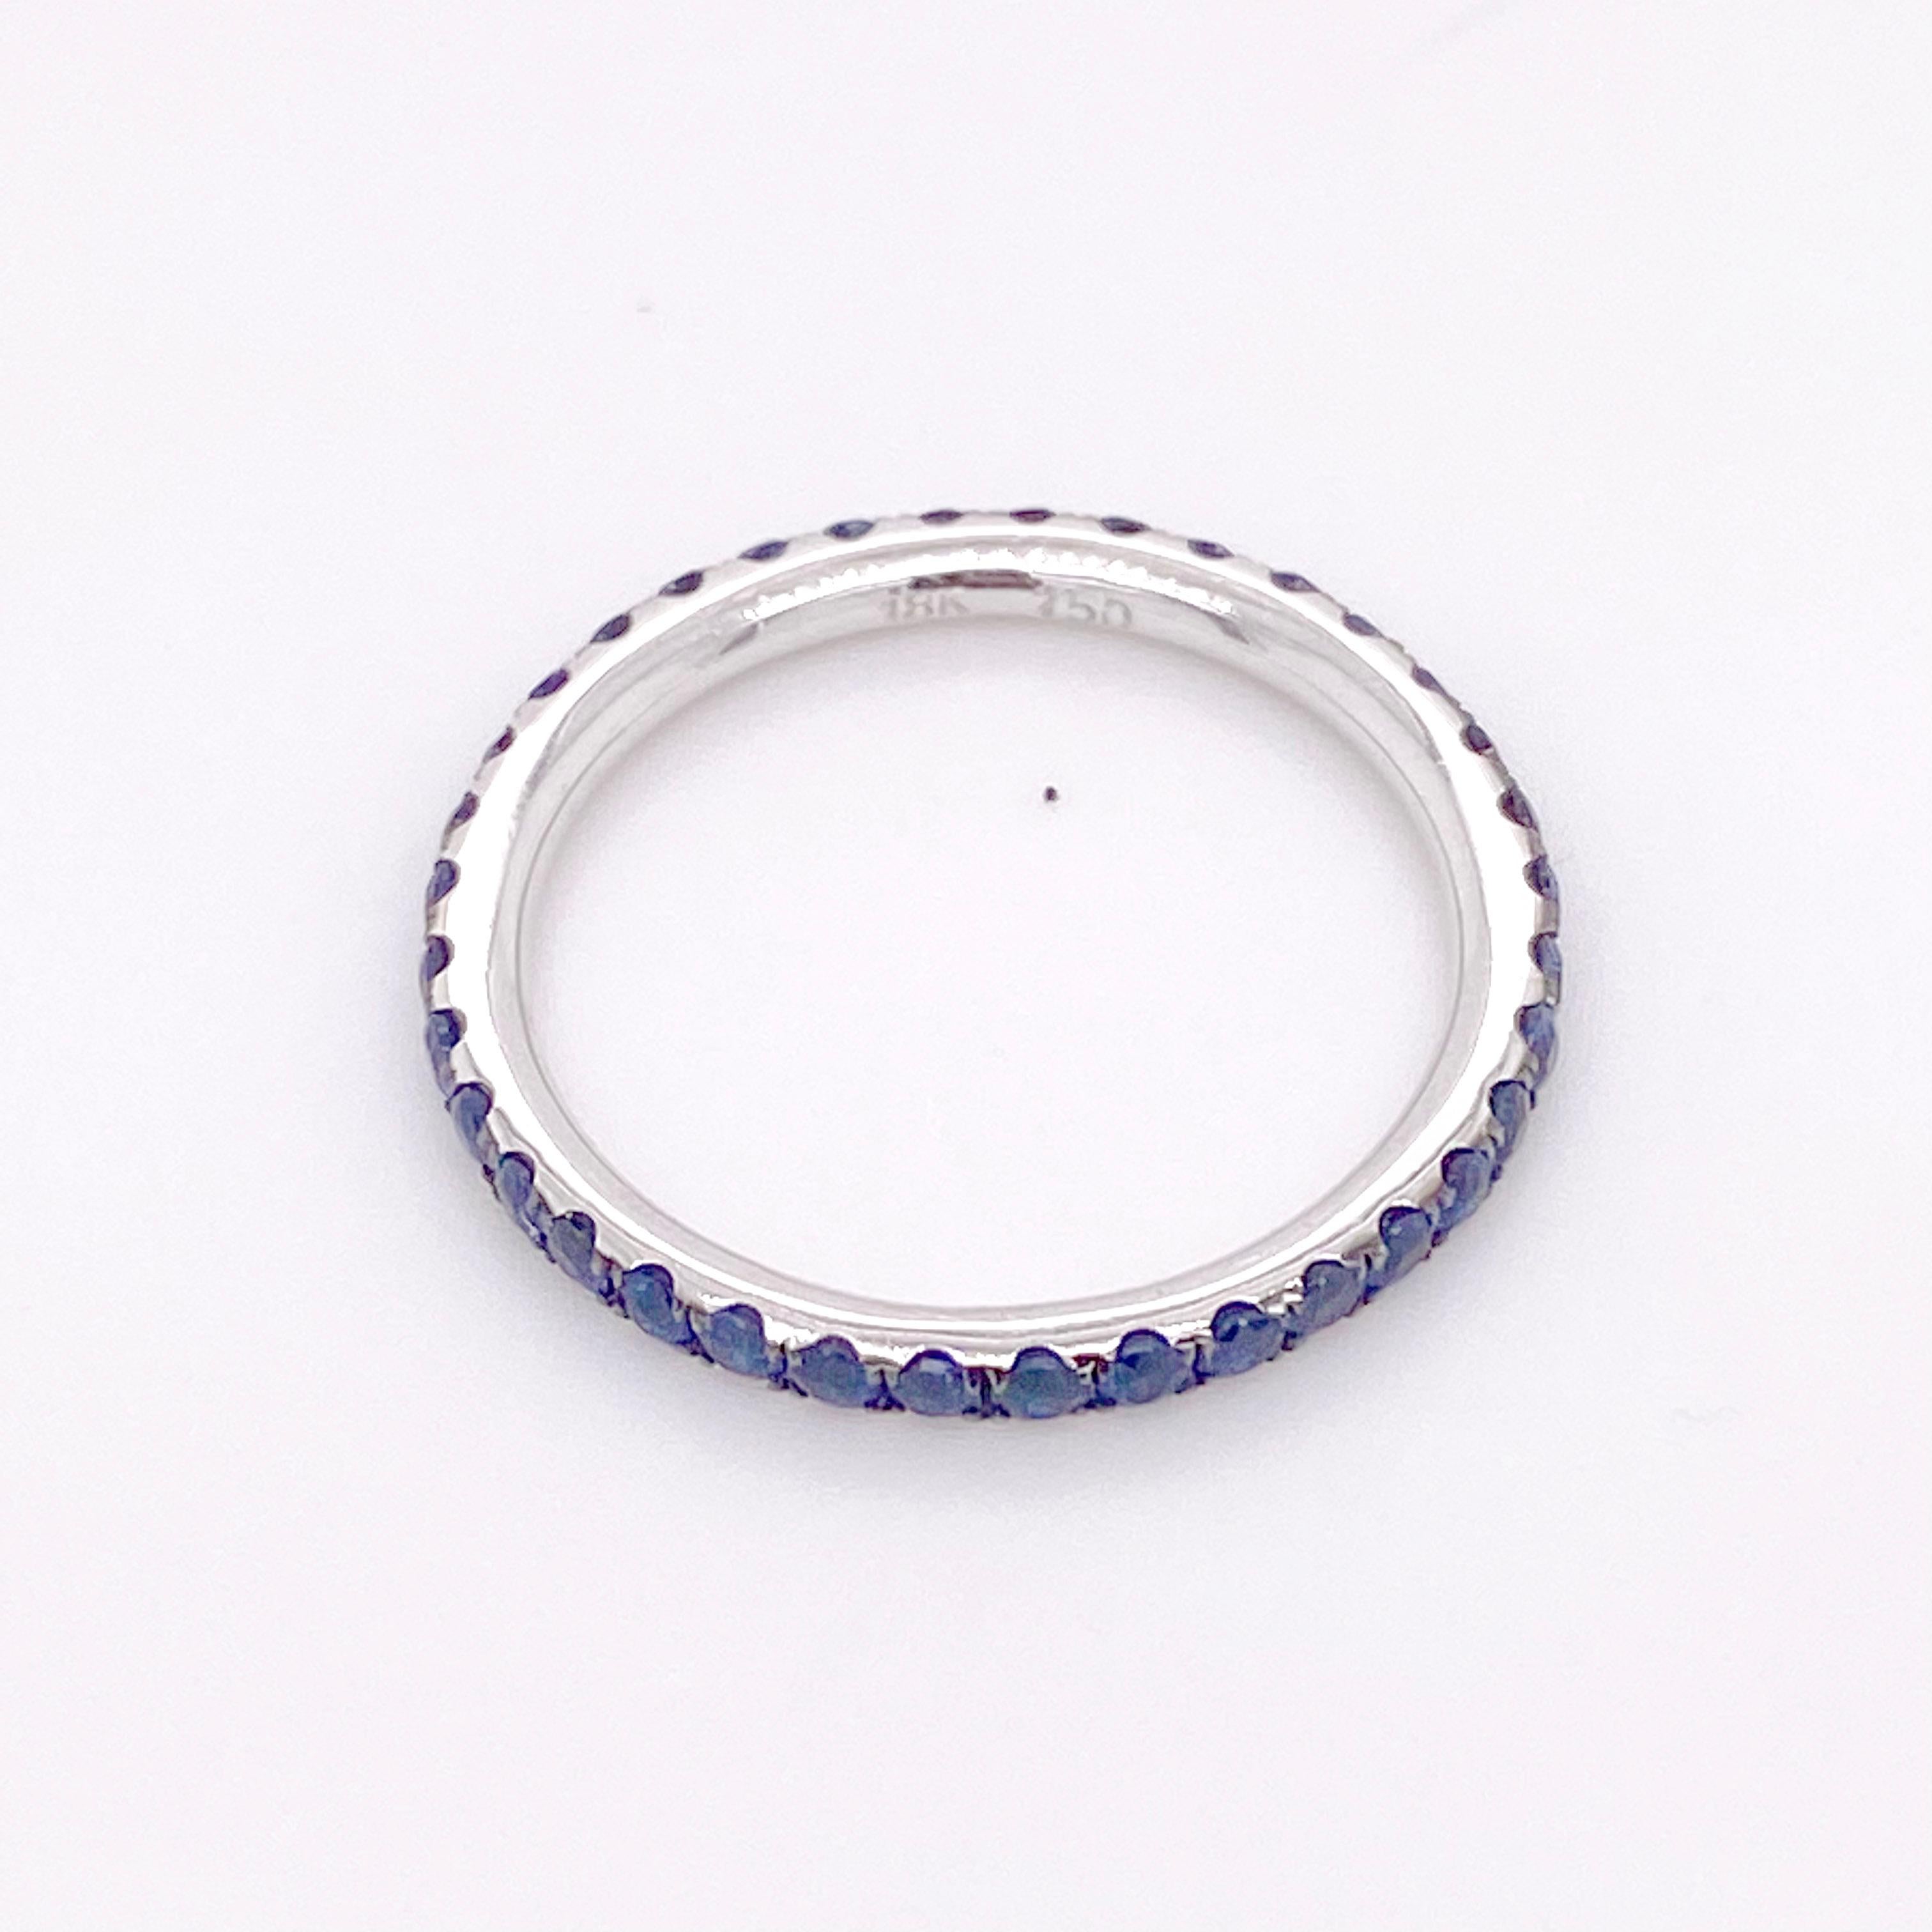 sapphire band ring